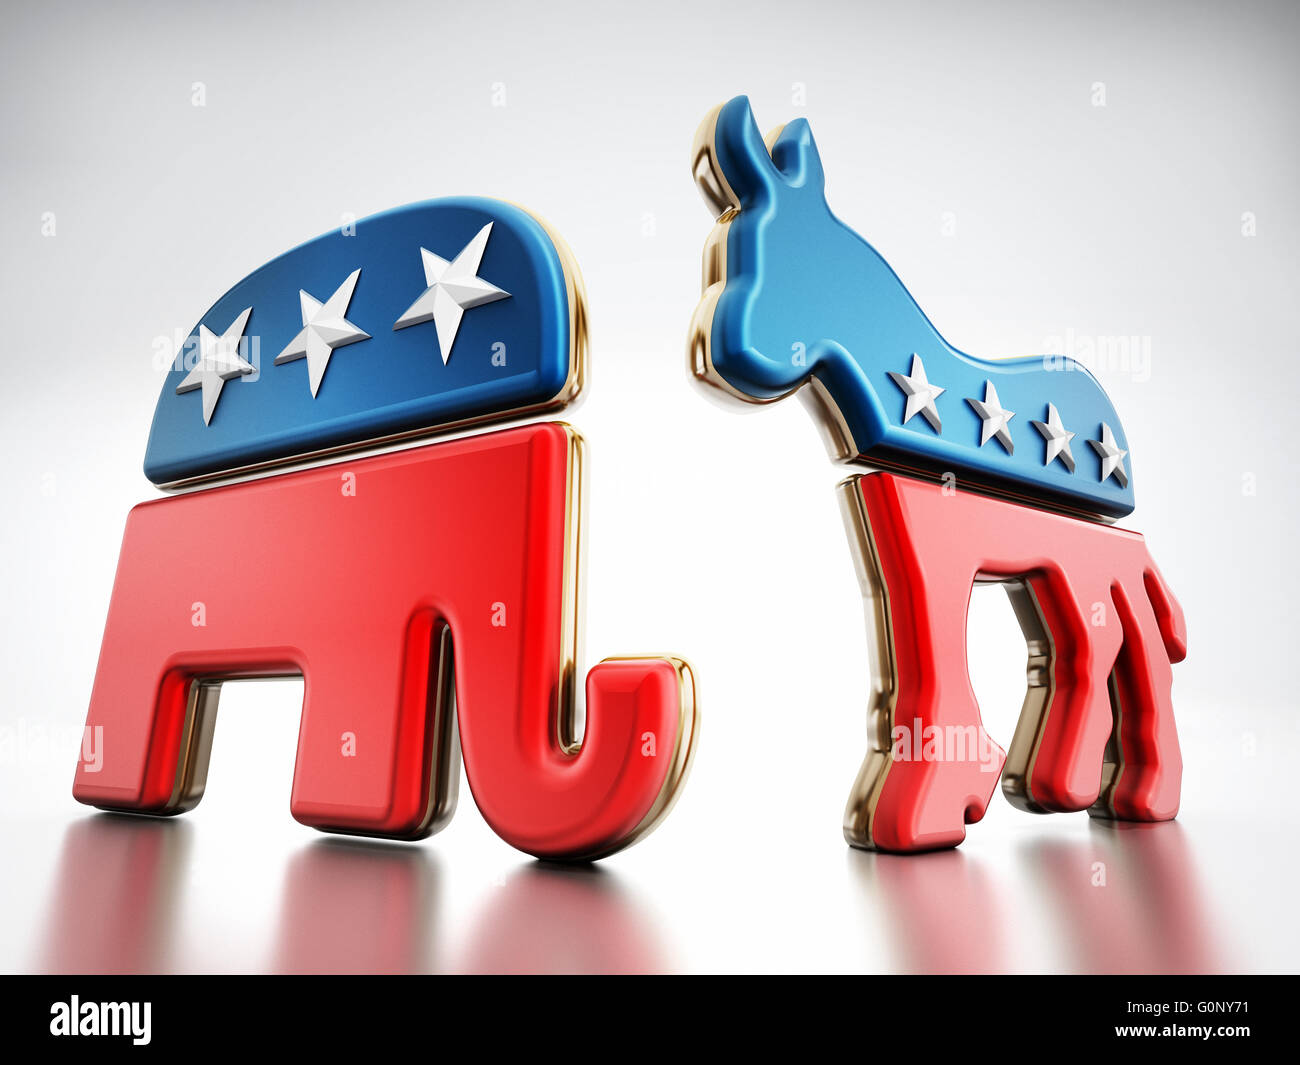 USA Political party symbols isolated on white background. Elephant for Republicans and donkey for the democrats. Stock Photo